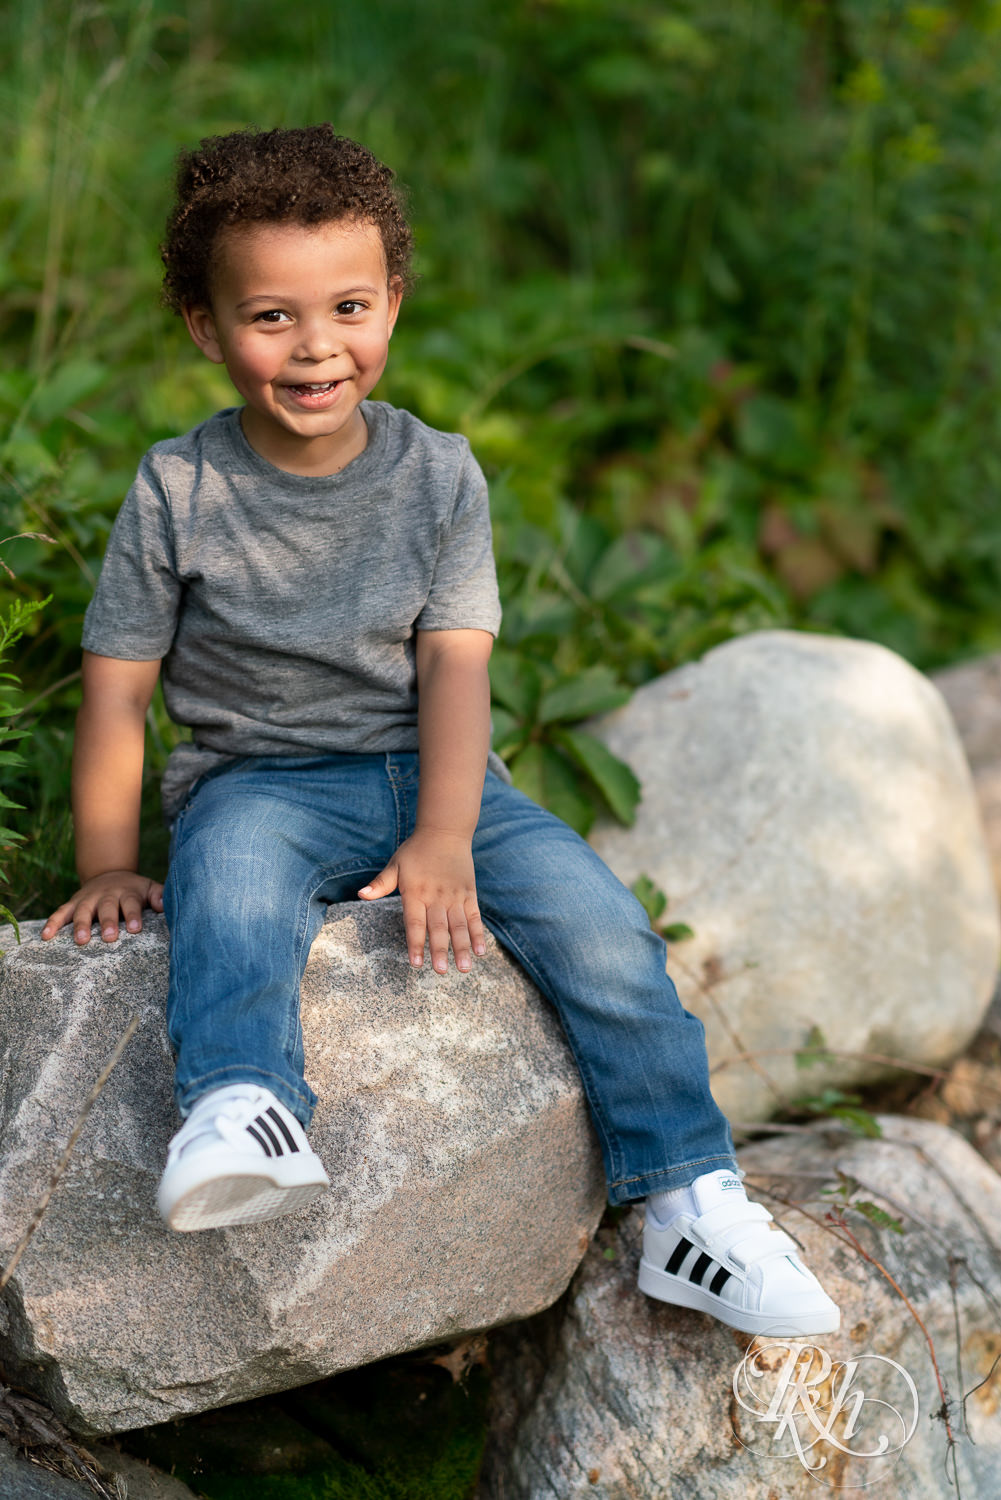 Little boy dressed in jeans and a gray shirt sitting on a rock.